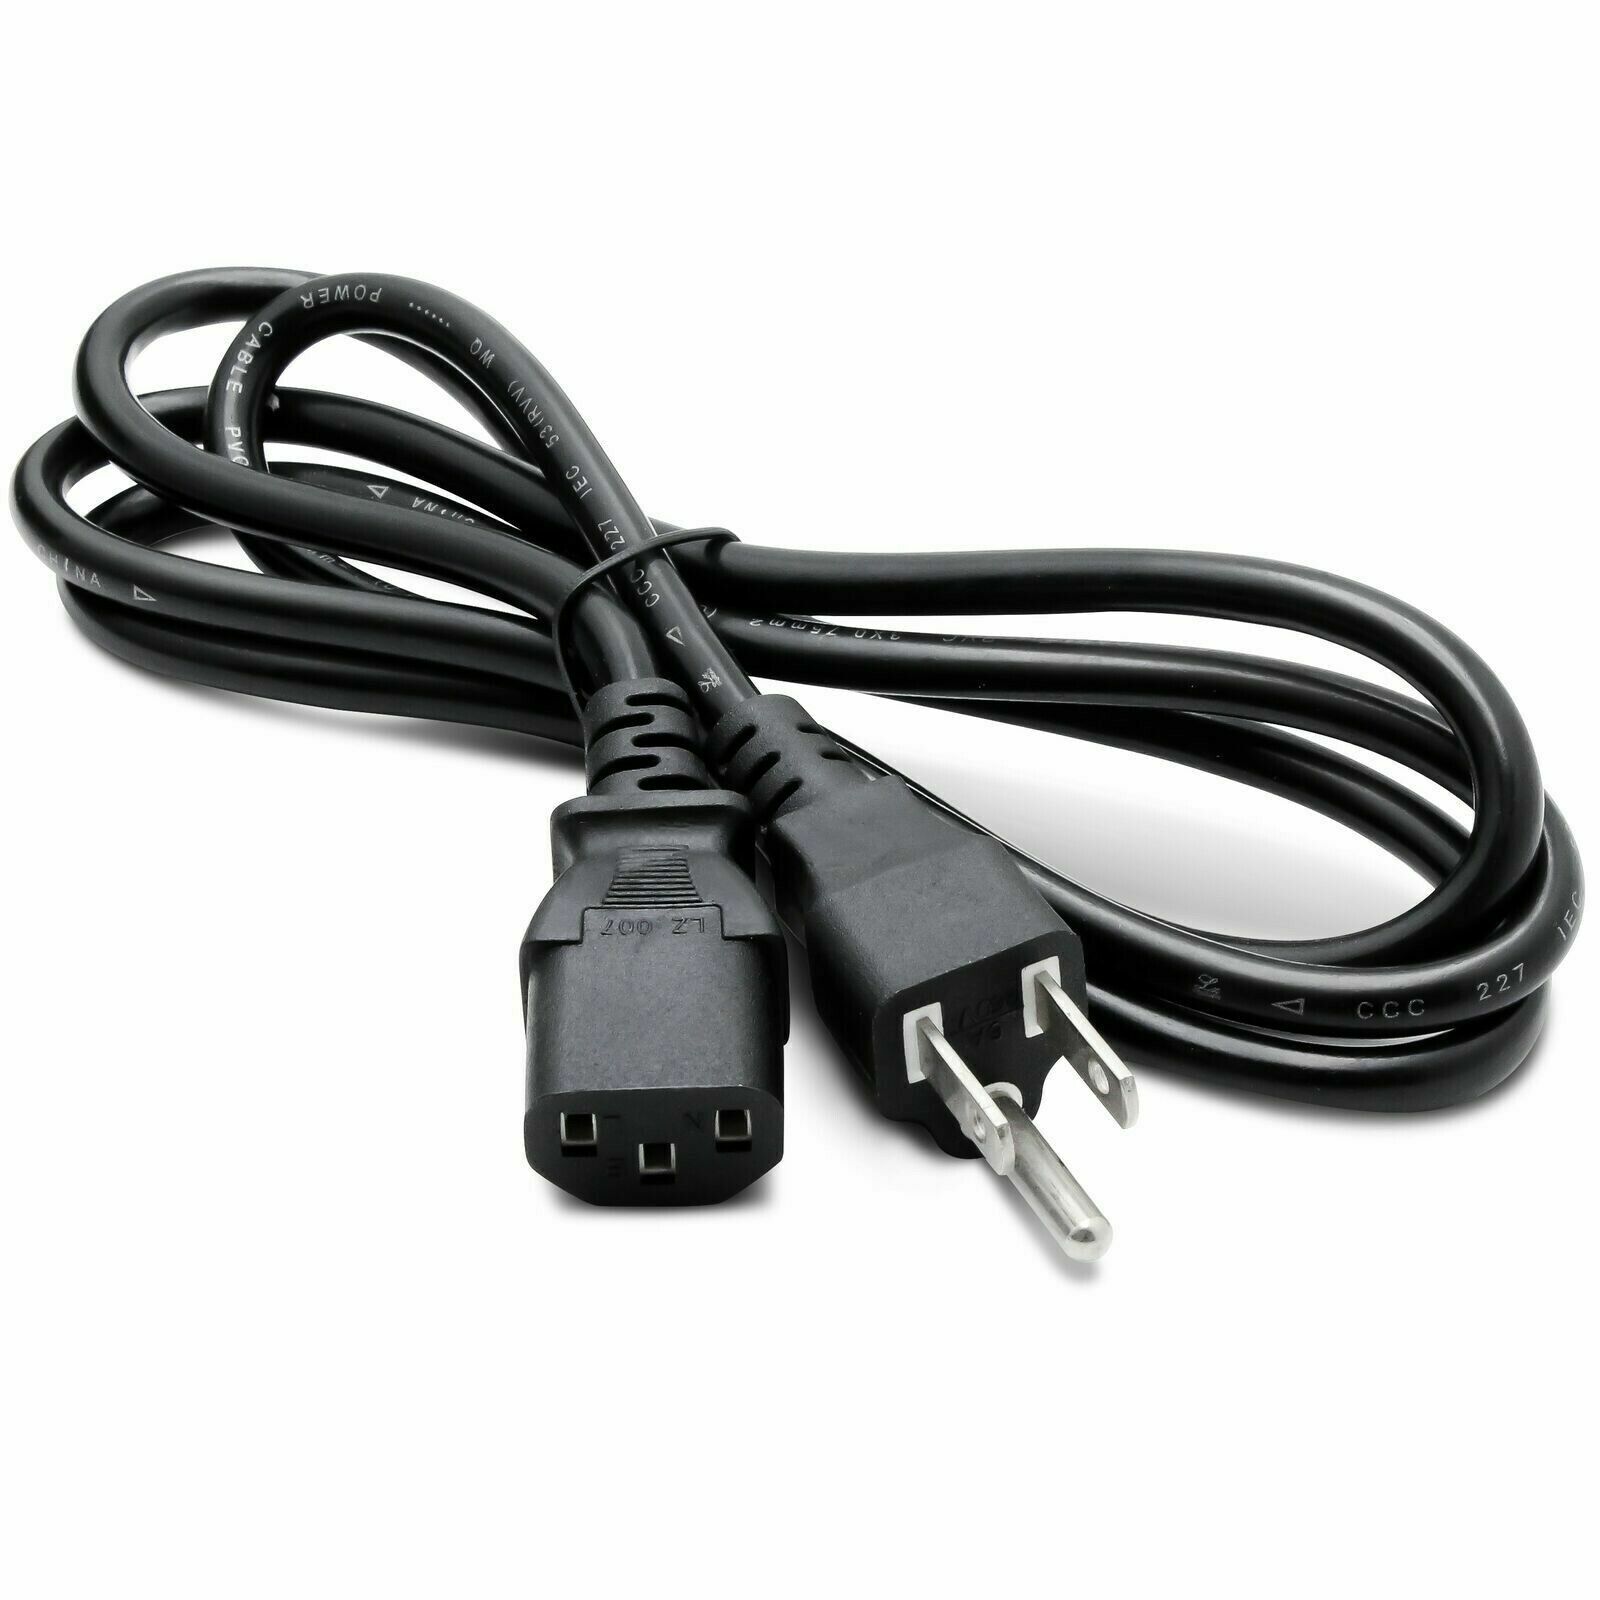 IBM Dell LCD TV Monitor Computer Printer AC Replacement 3 Prong Power Cable Cord